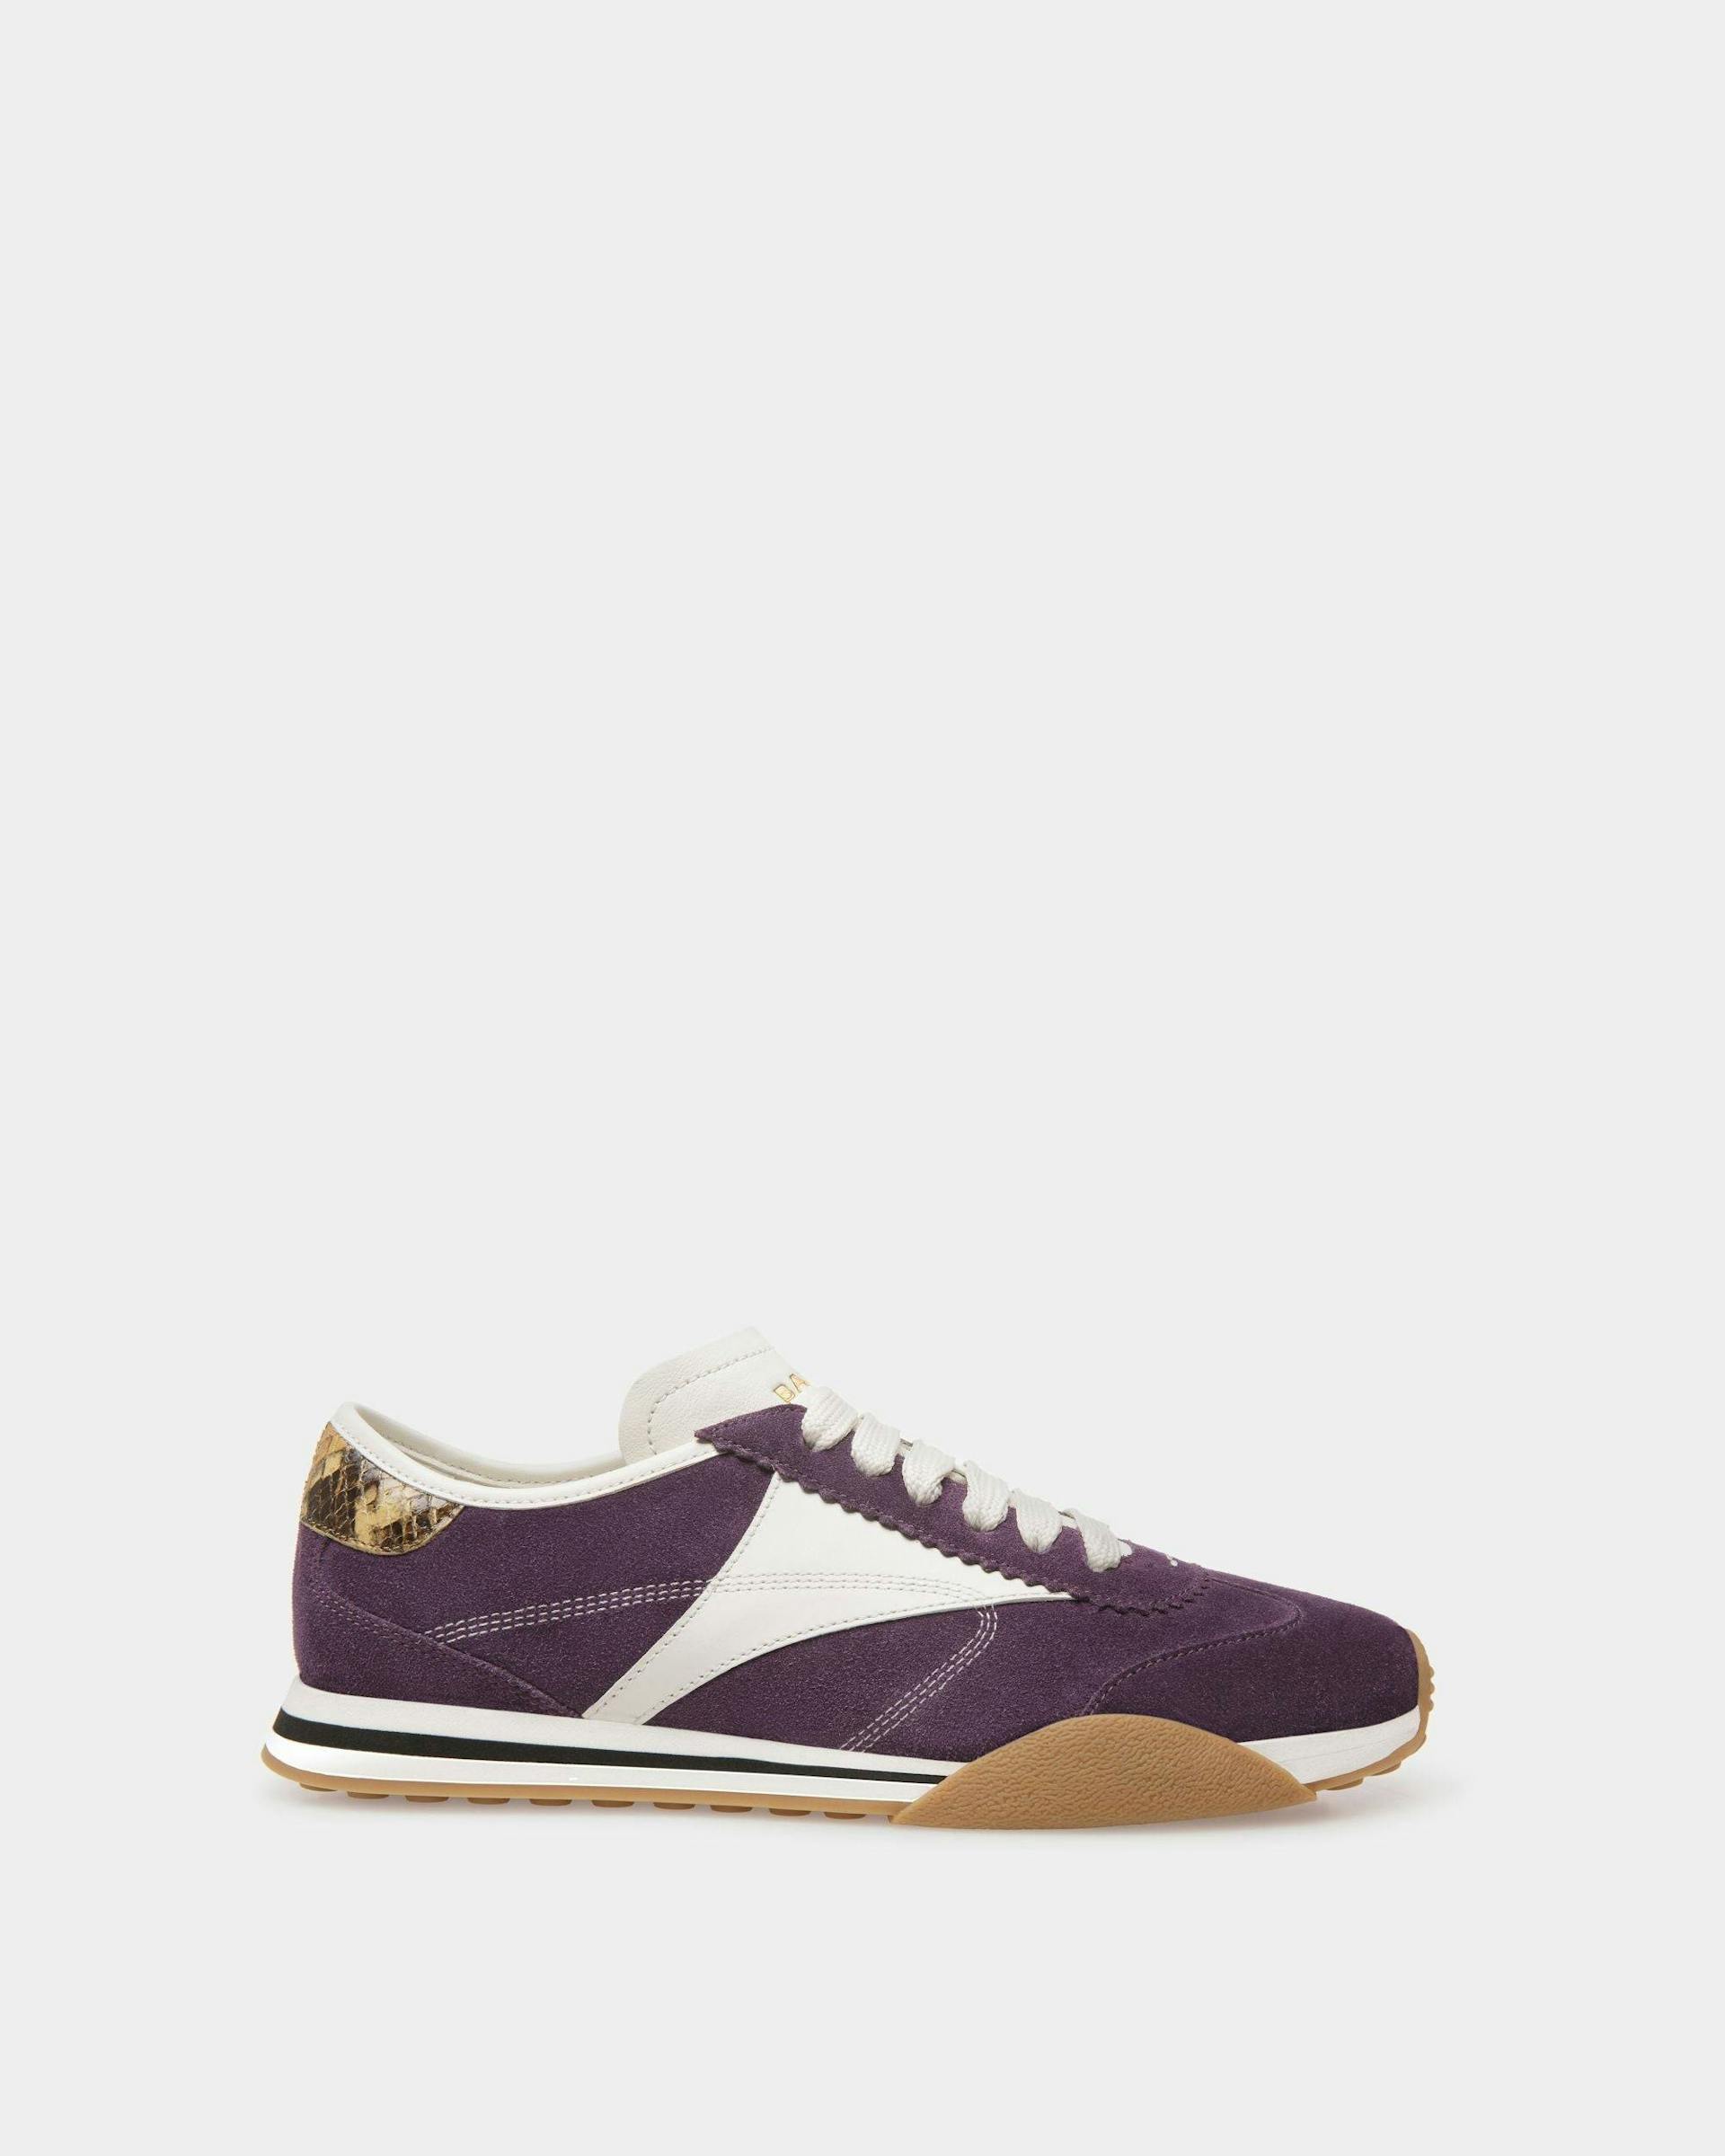 Sussex Sneakers In Orchid And White Leather - Women's - Bally - 01